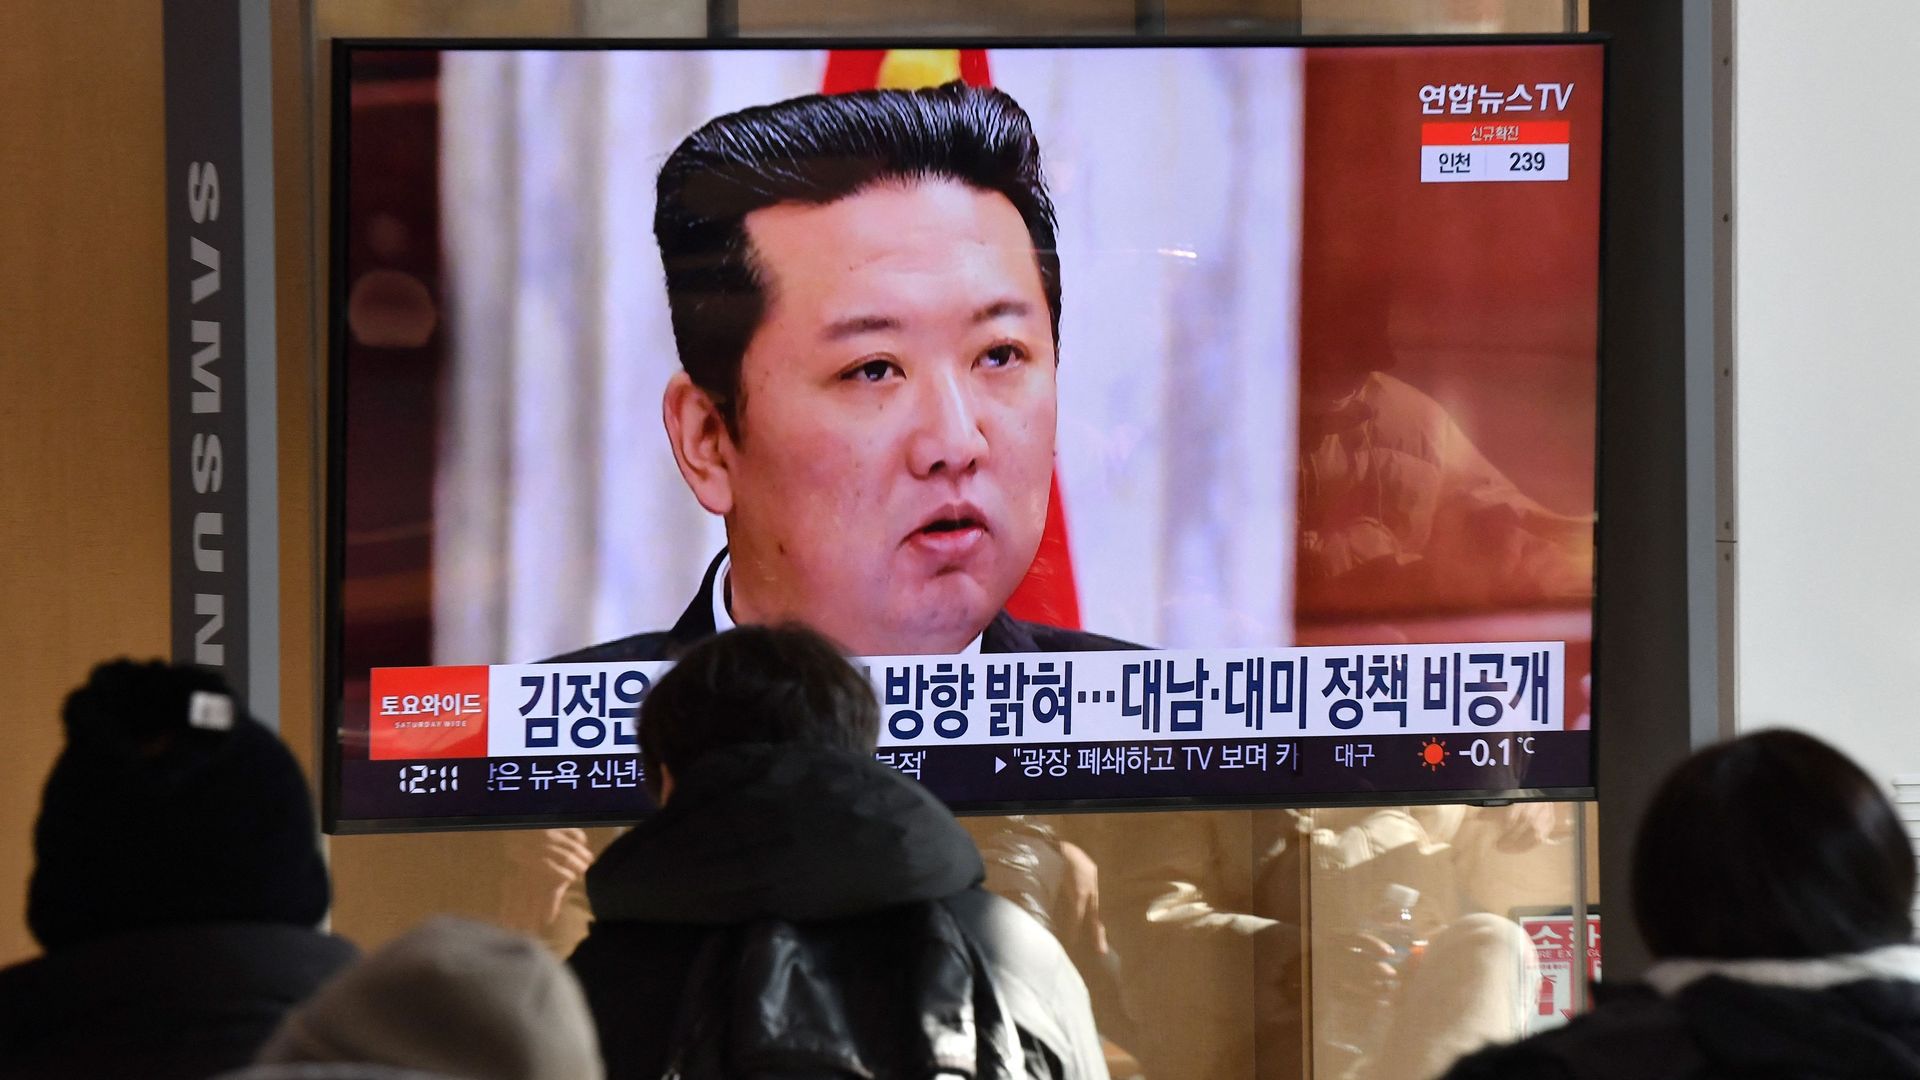 North Korean leader Kim Jong Un during a televised meeting of the Central Committee of the Workers' Party of Korea, at a railway station in Seoul on January 1